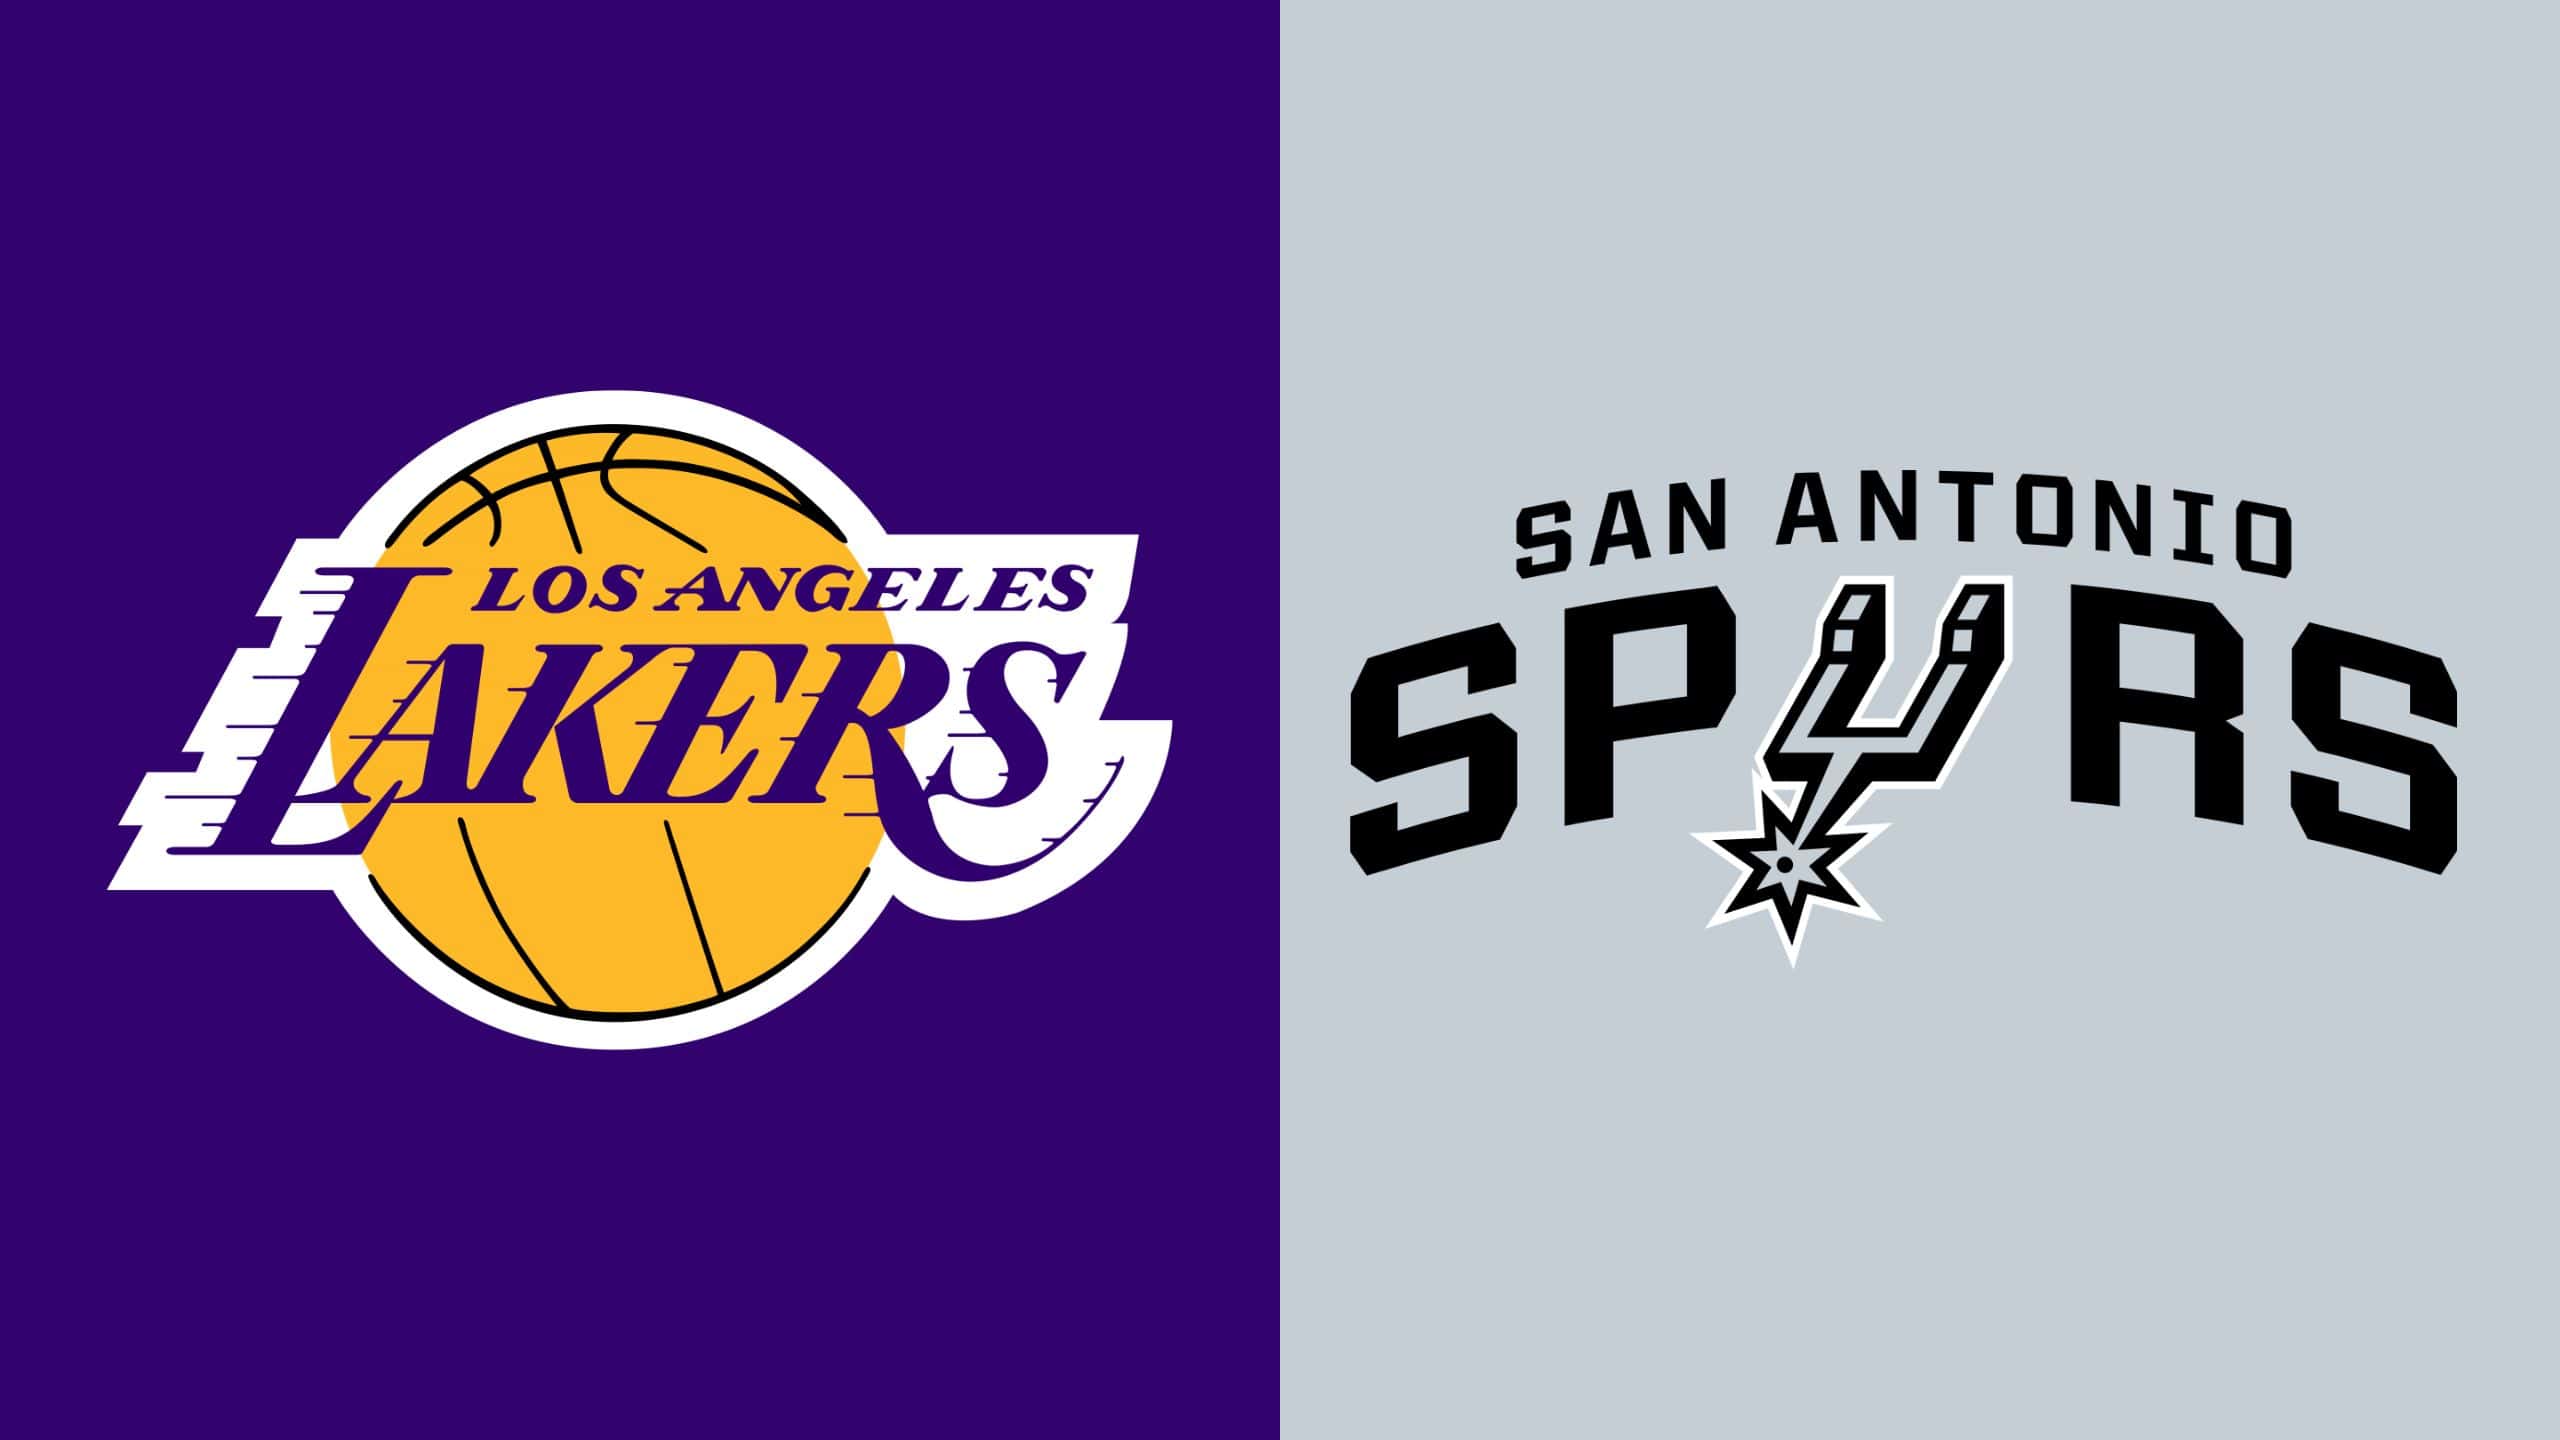 Lakers and Spurs Logos